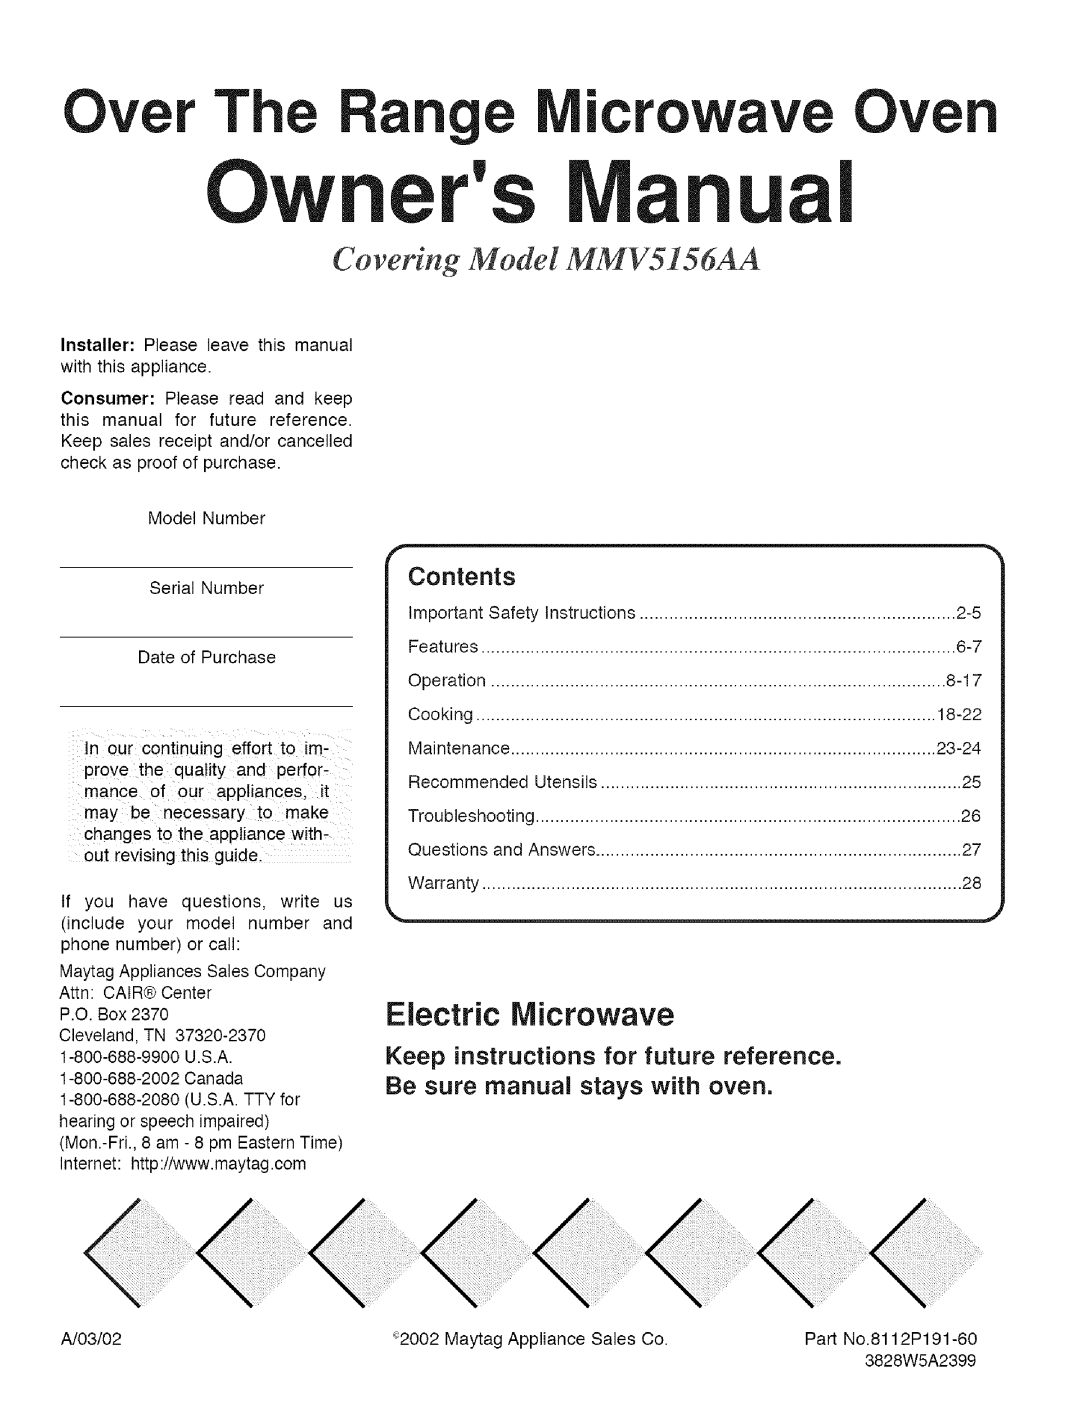 Maytag MMVS156AA owner manual Ove T e, Electric Microwave, Keep instructions for future reference, Oven 